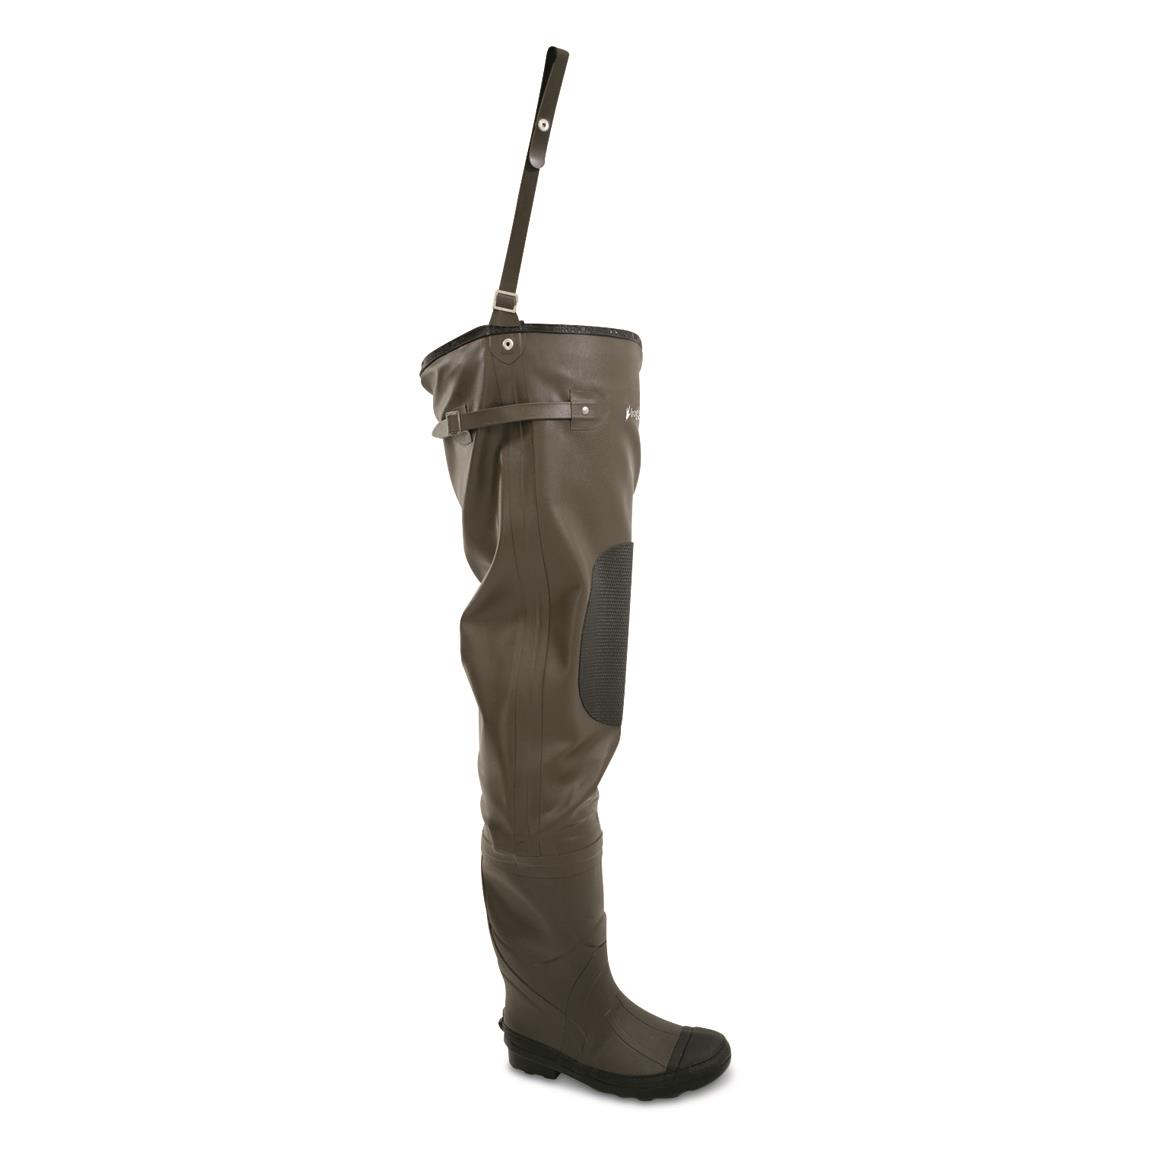 frogg toggs Classic II Hip Boot Waders, Cleated Soles, Brown